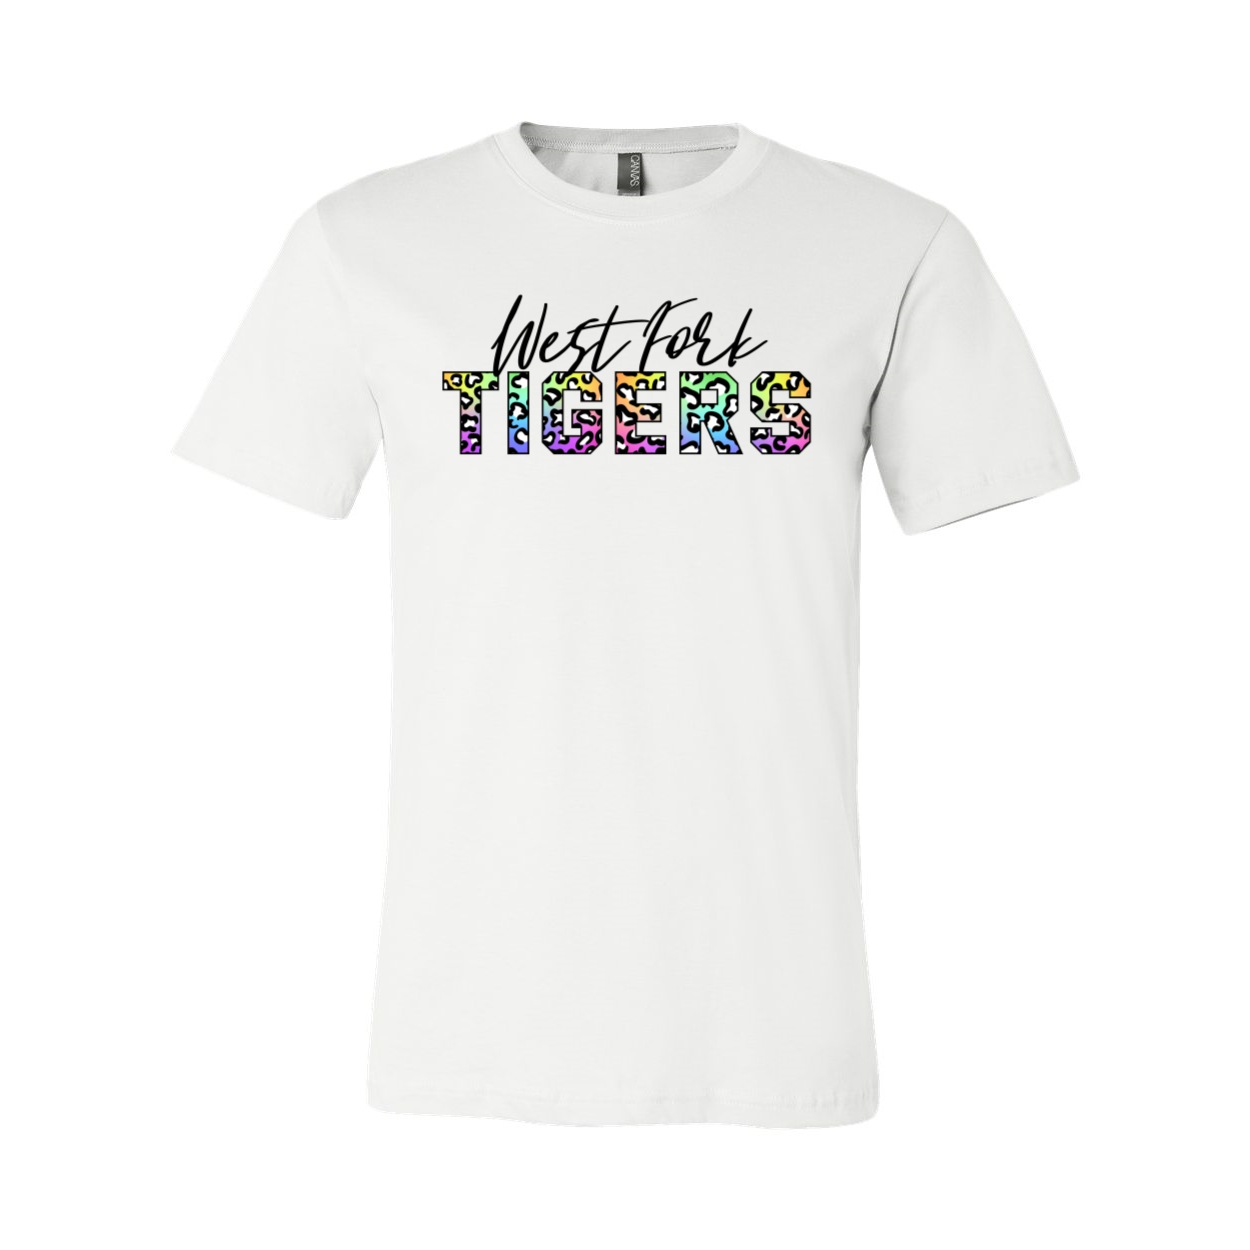 West Fork Tigers Colorful Animal Print T-Shir